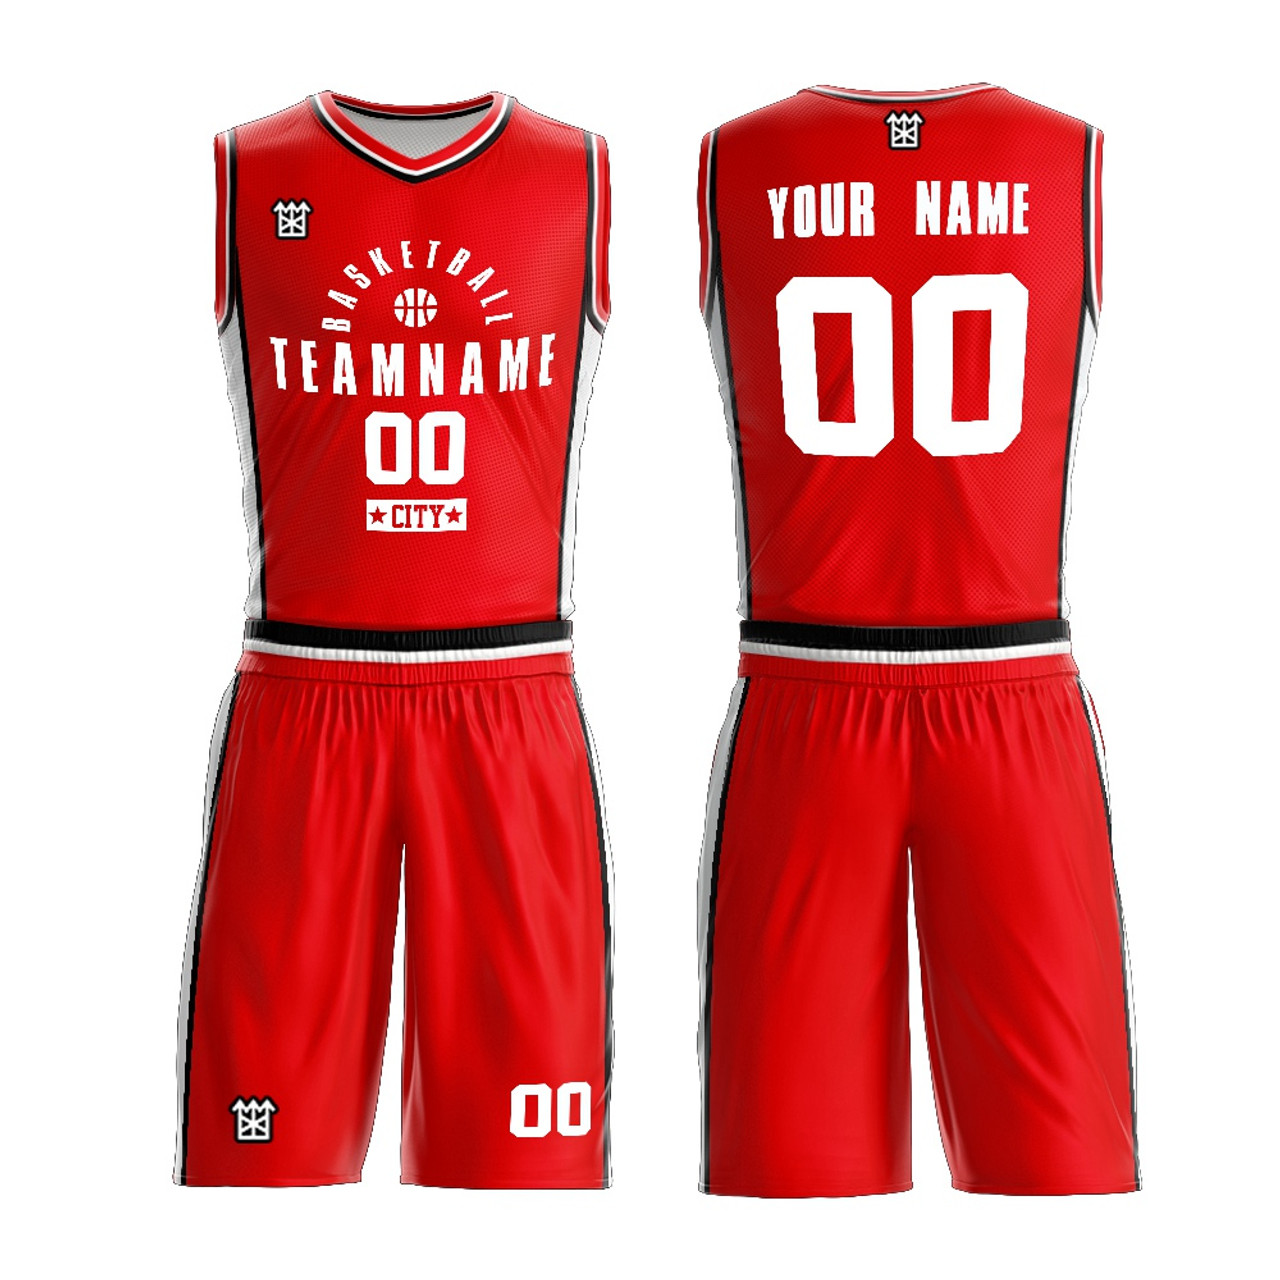  Custom Men Youth Reversible Basketball Jersey Uniform Printed  Personalized Name Number Sportswear Big Size, Red&black, One Size 